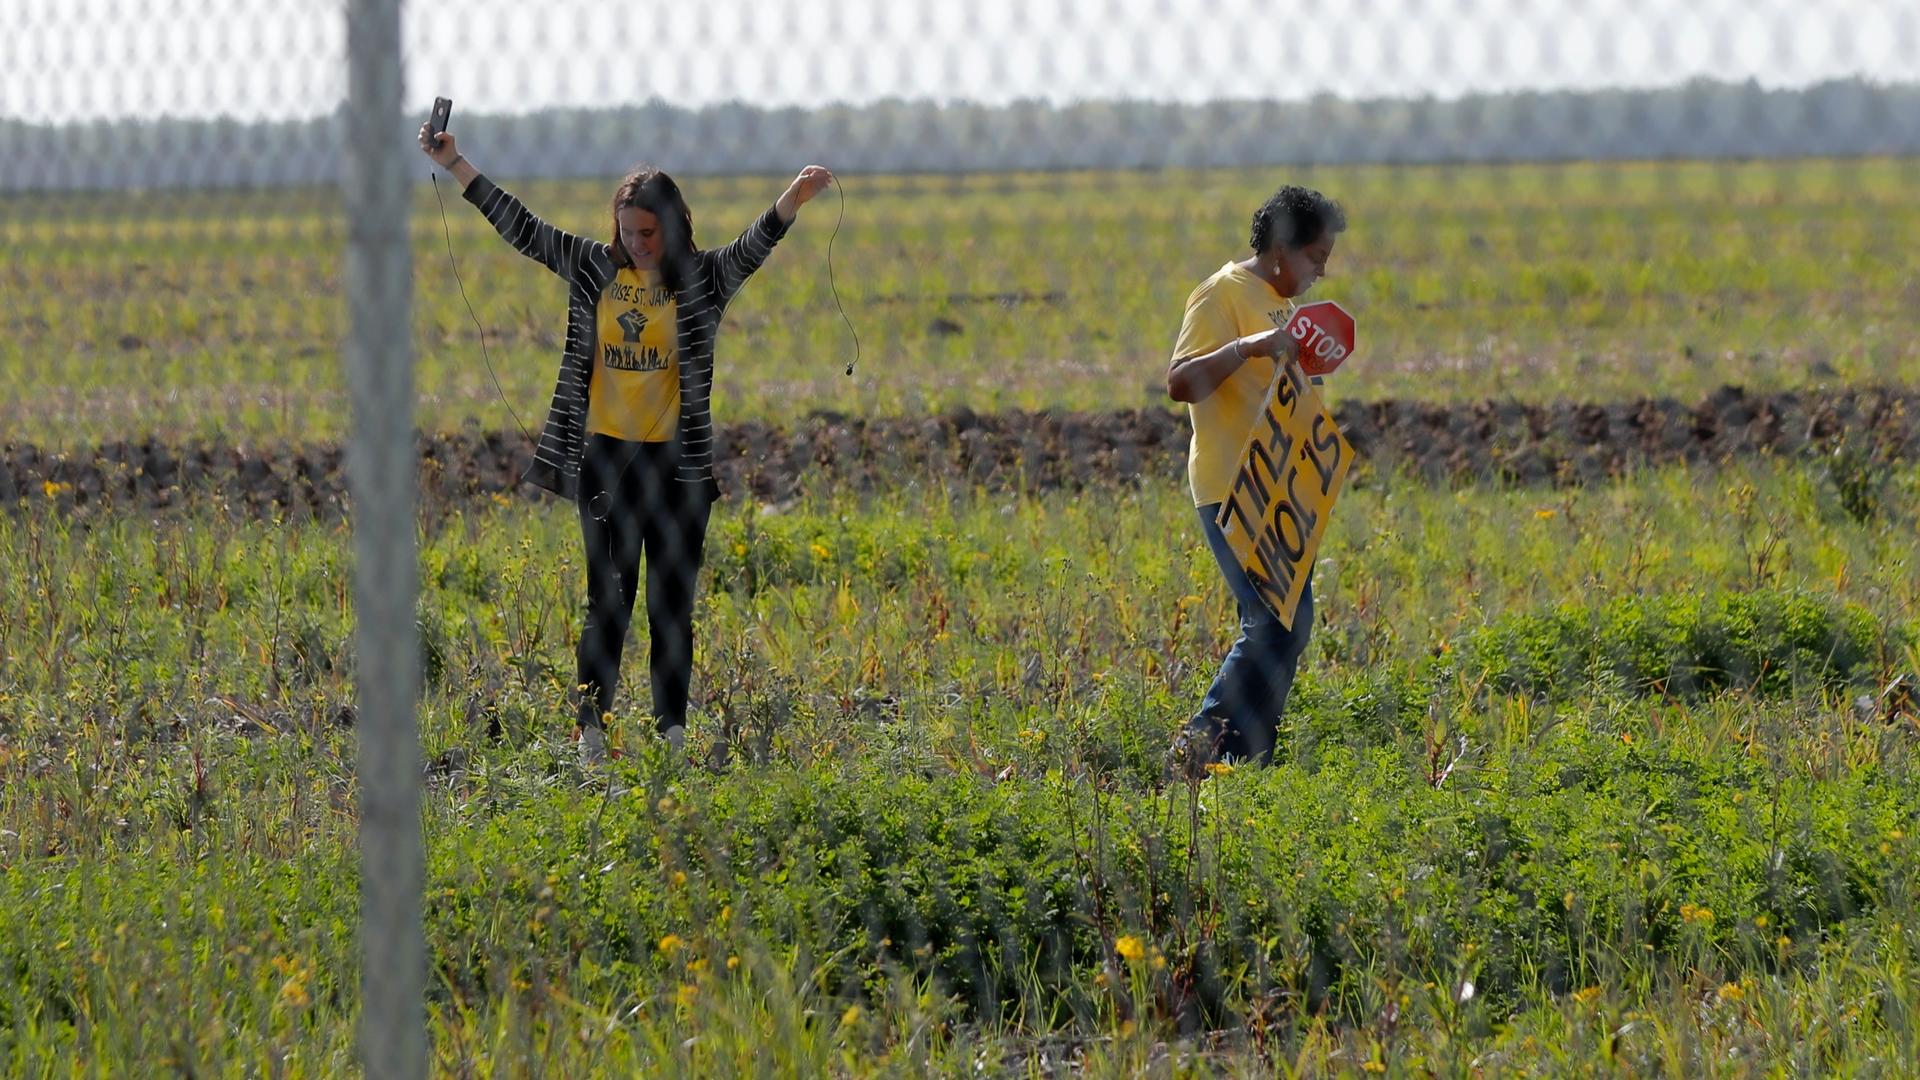 Two Black American women wearing yellow activist shirts stand in a field behind a fence 